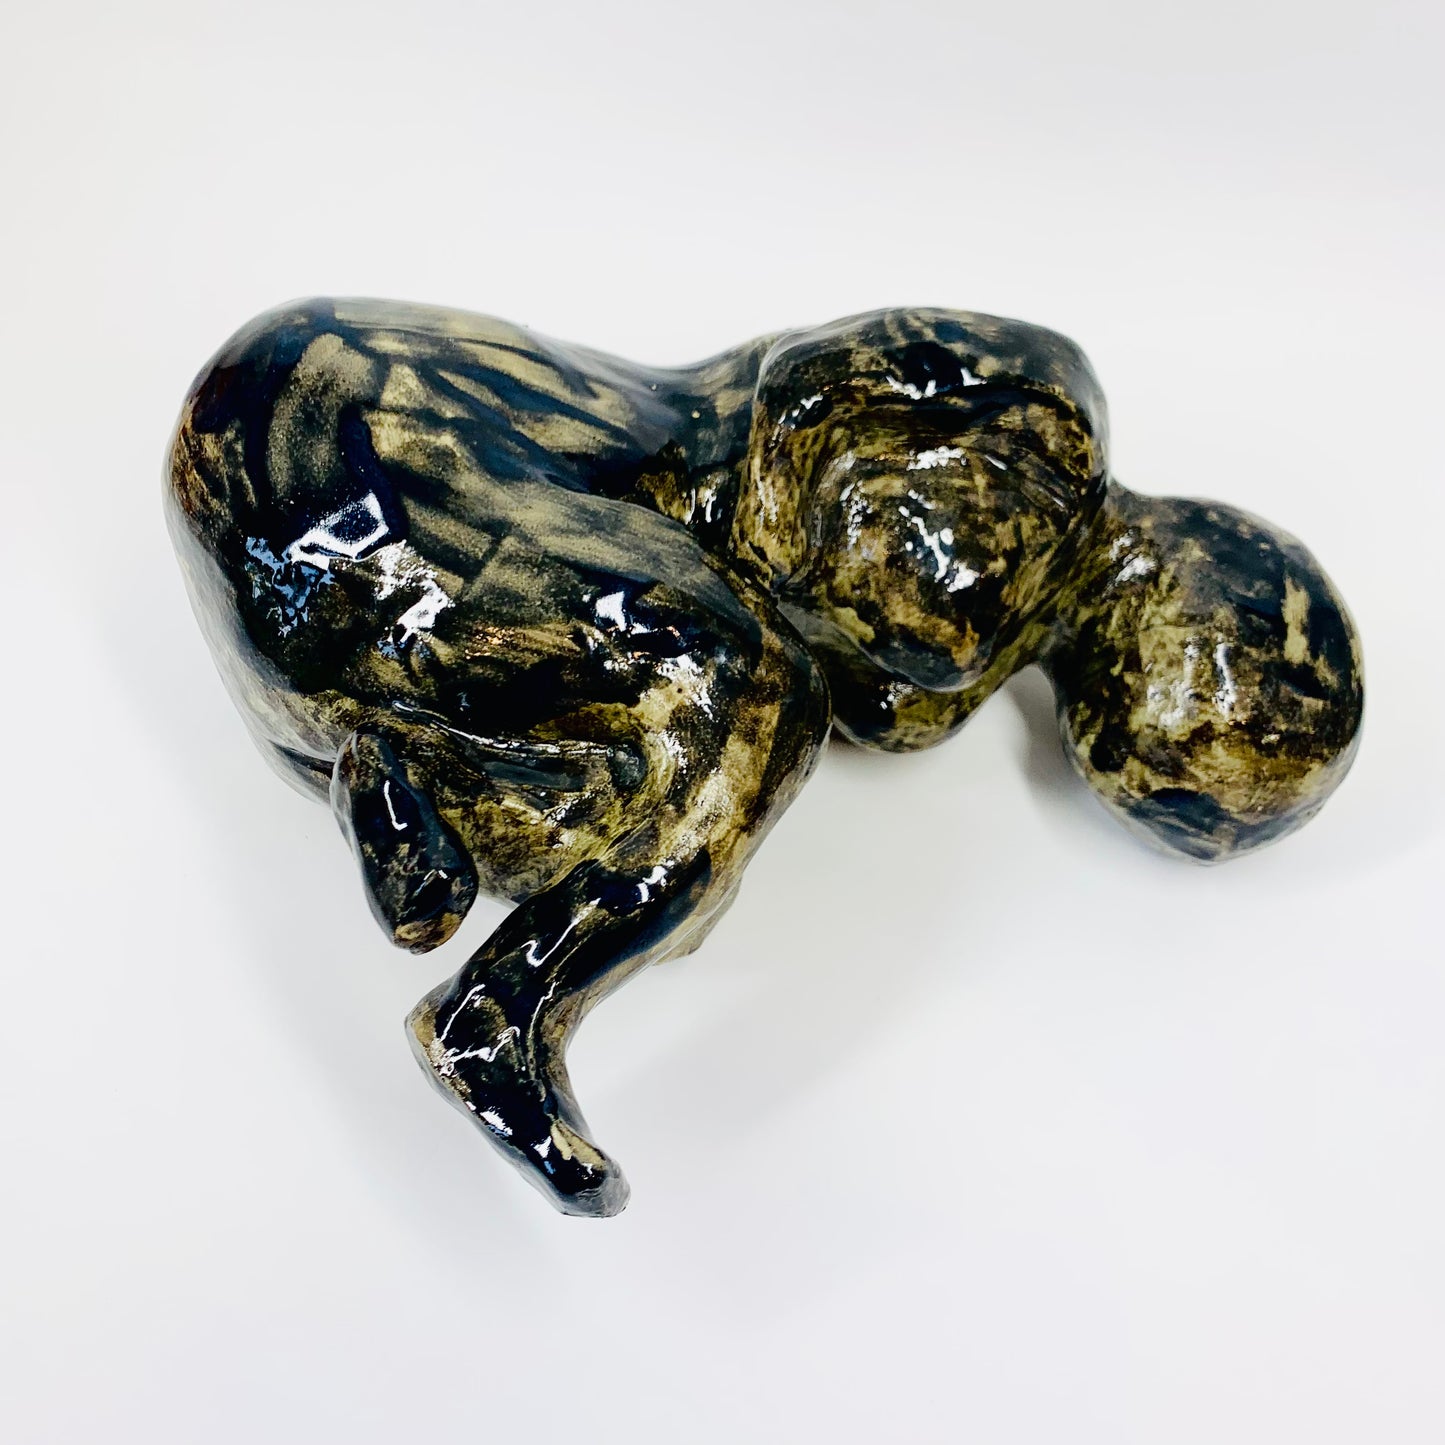 Australian pottery sculpture depicting woman clutching her stomach